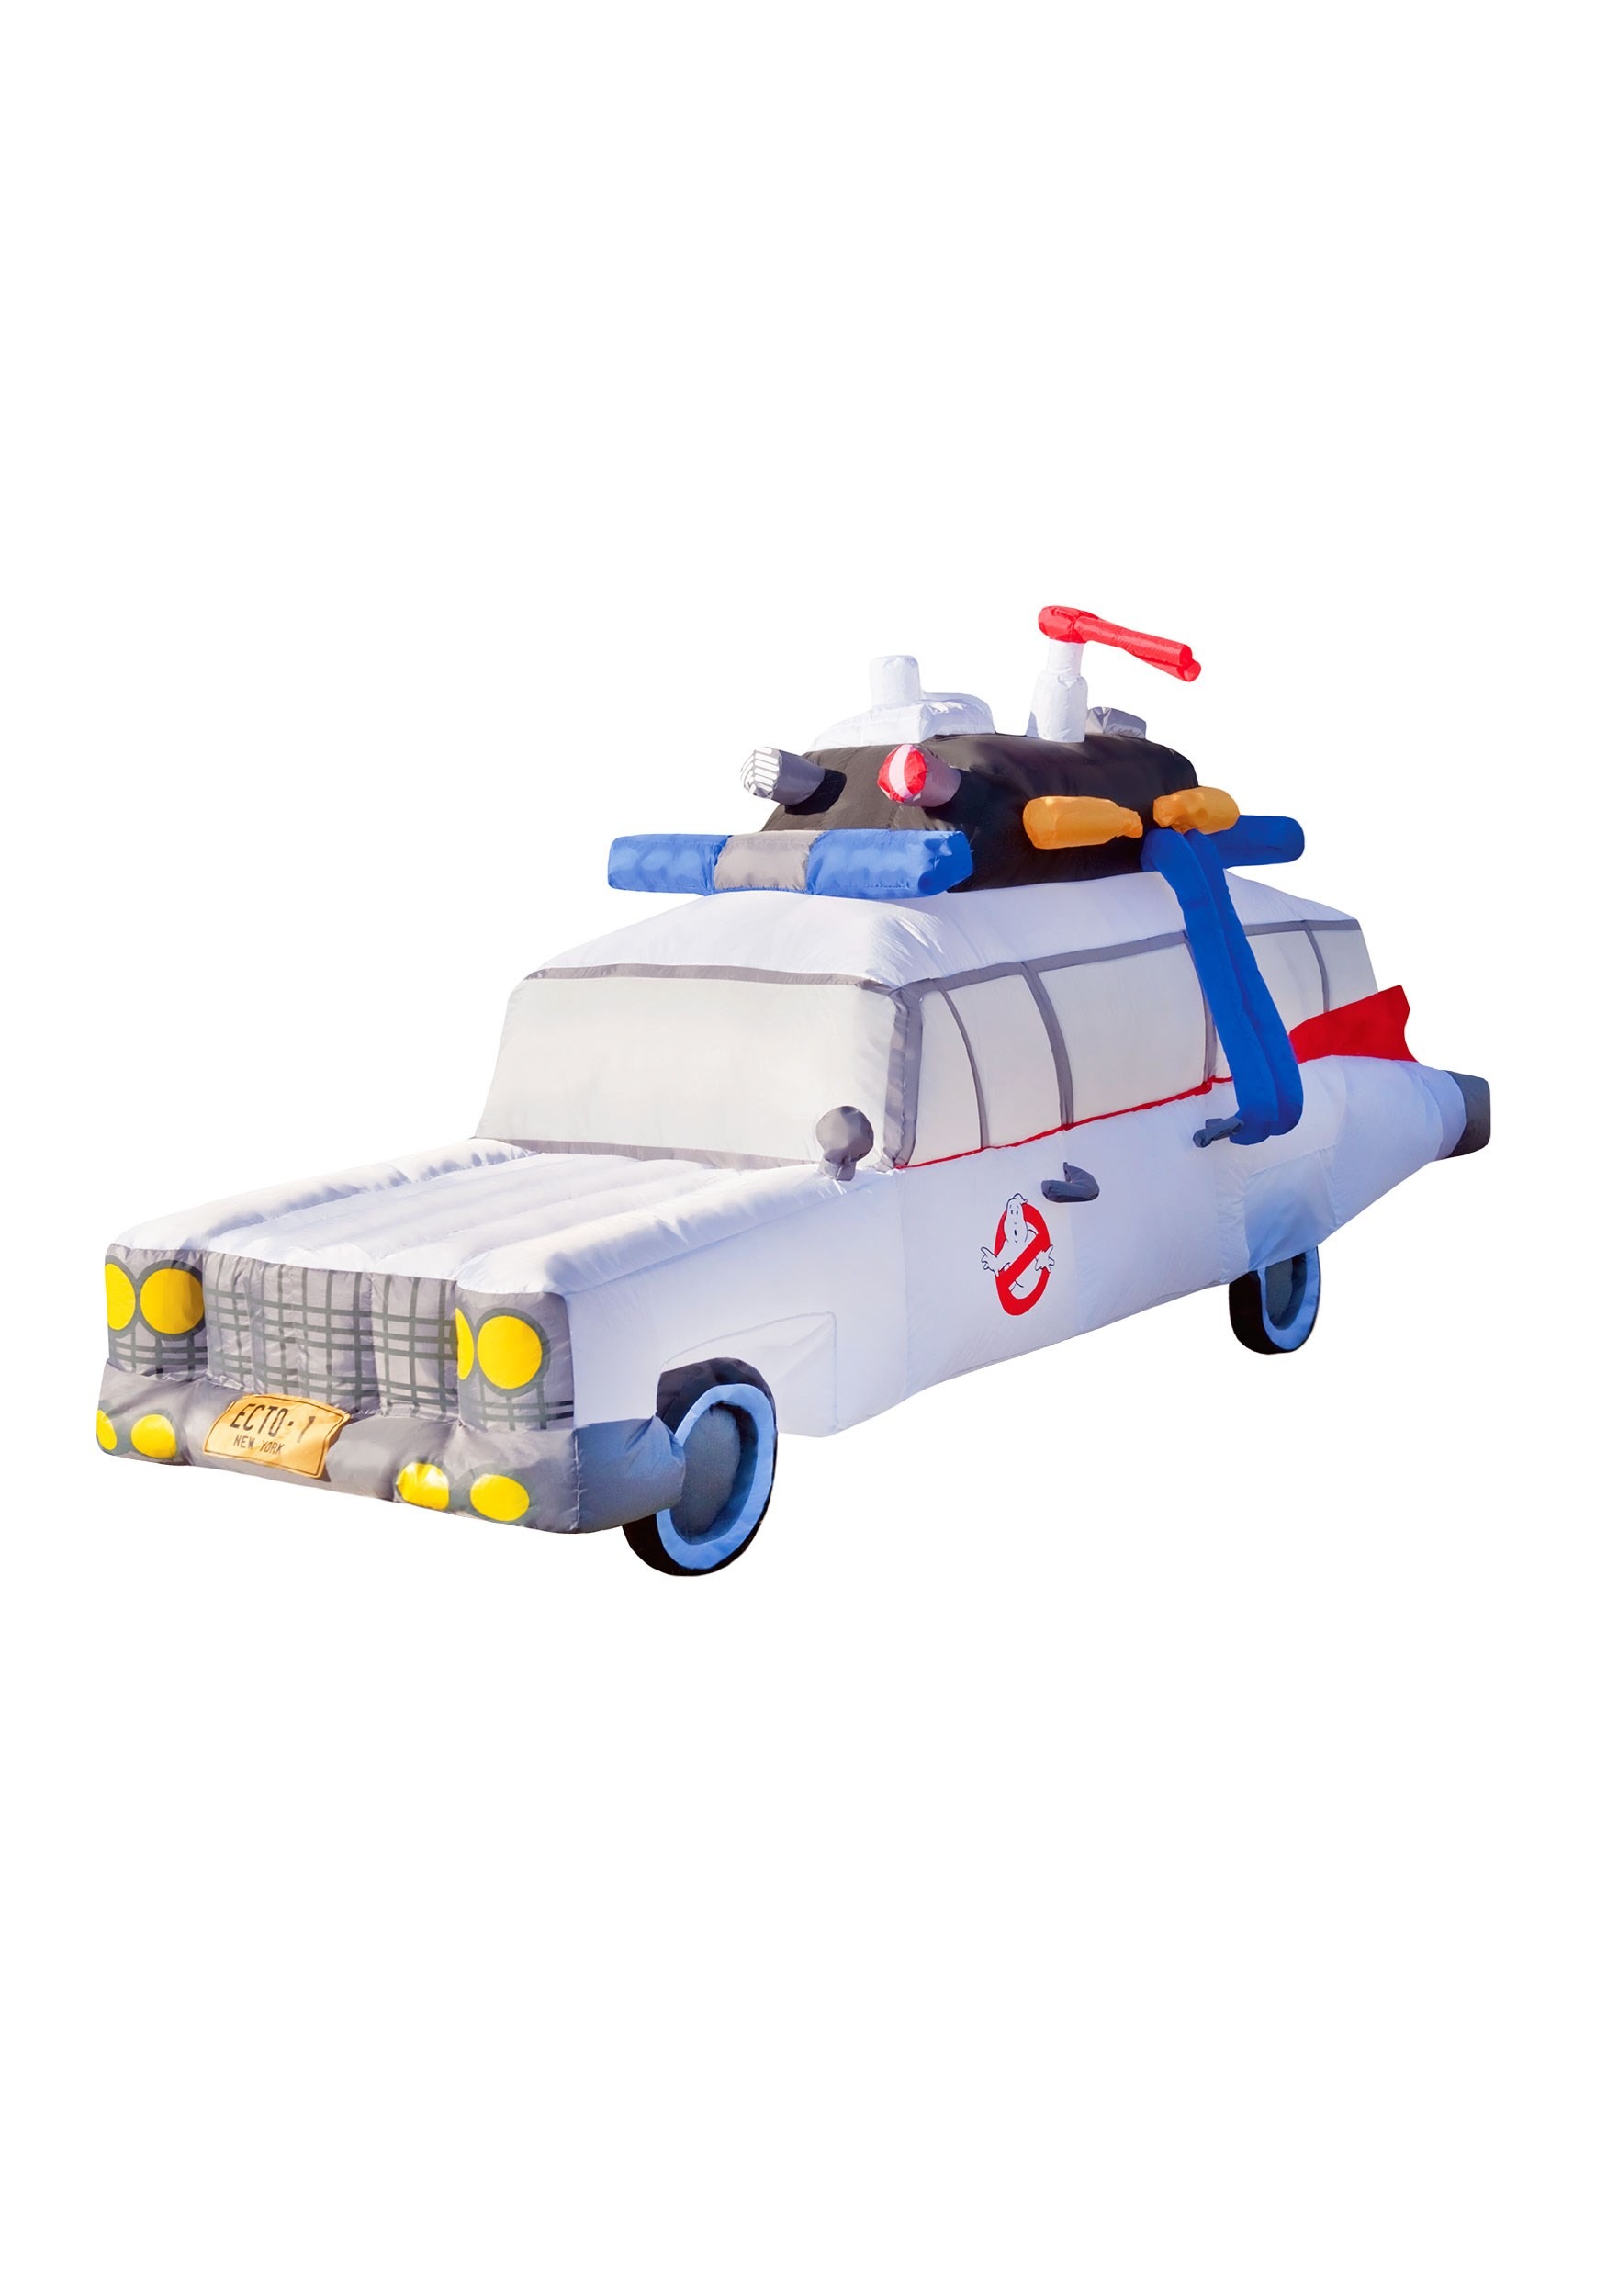 Inflatable Ghostbusters Ecto-1 Decoration